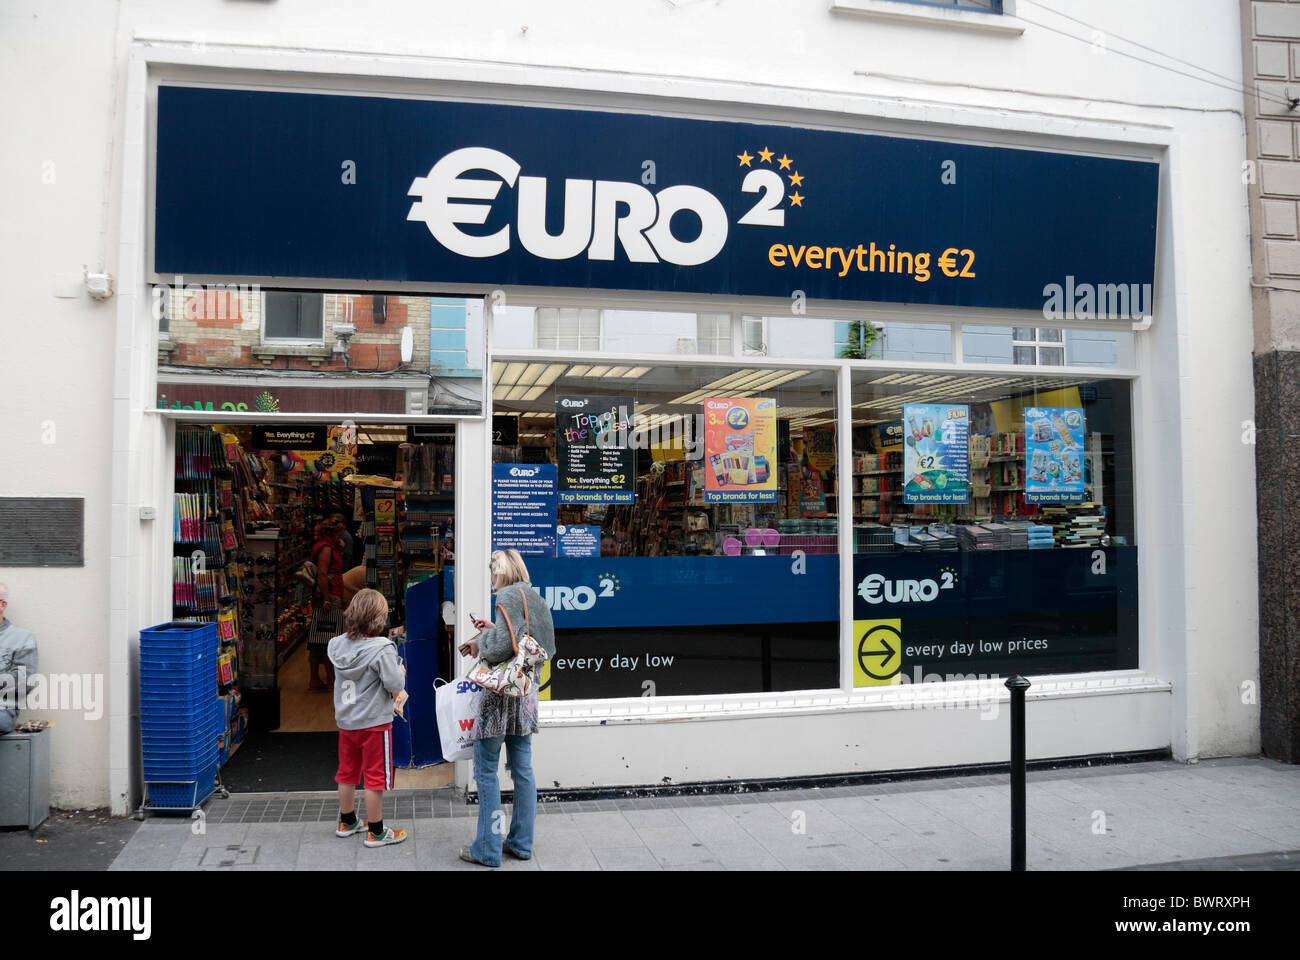 The shop entrance to the Euro 2 store (everything 2 Euro) on Main Street,  Wexford Town, Co. Wexford, Ireland (Eire Stock Photo - Alamy